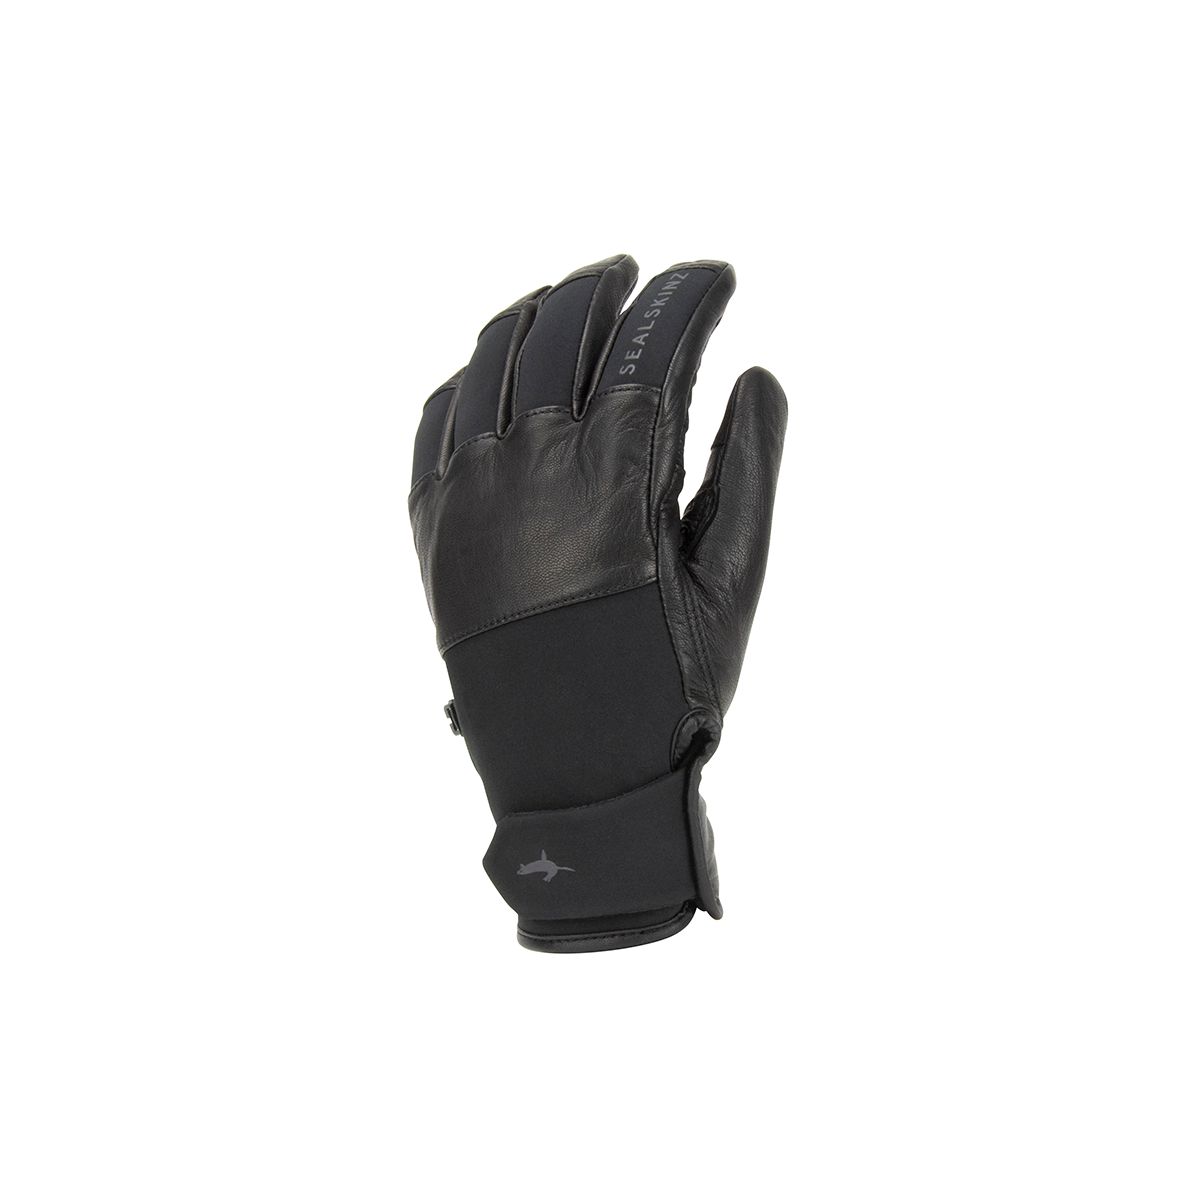 SealSkinz WATERPROOF COLD WEATHER WITH FUSION CONTROL Handschuhe